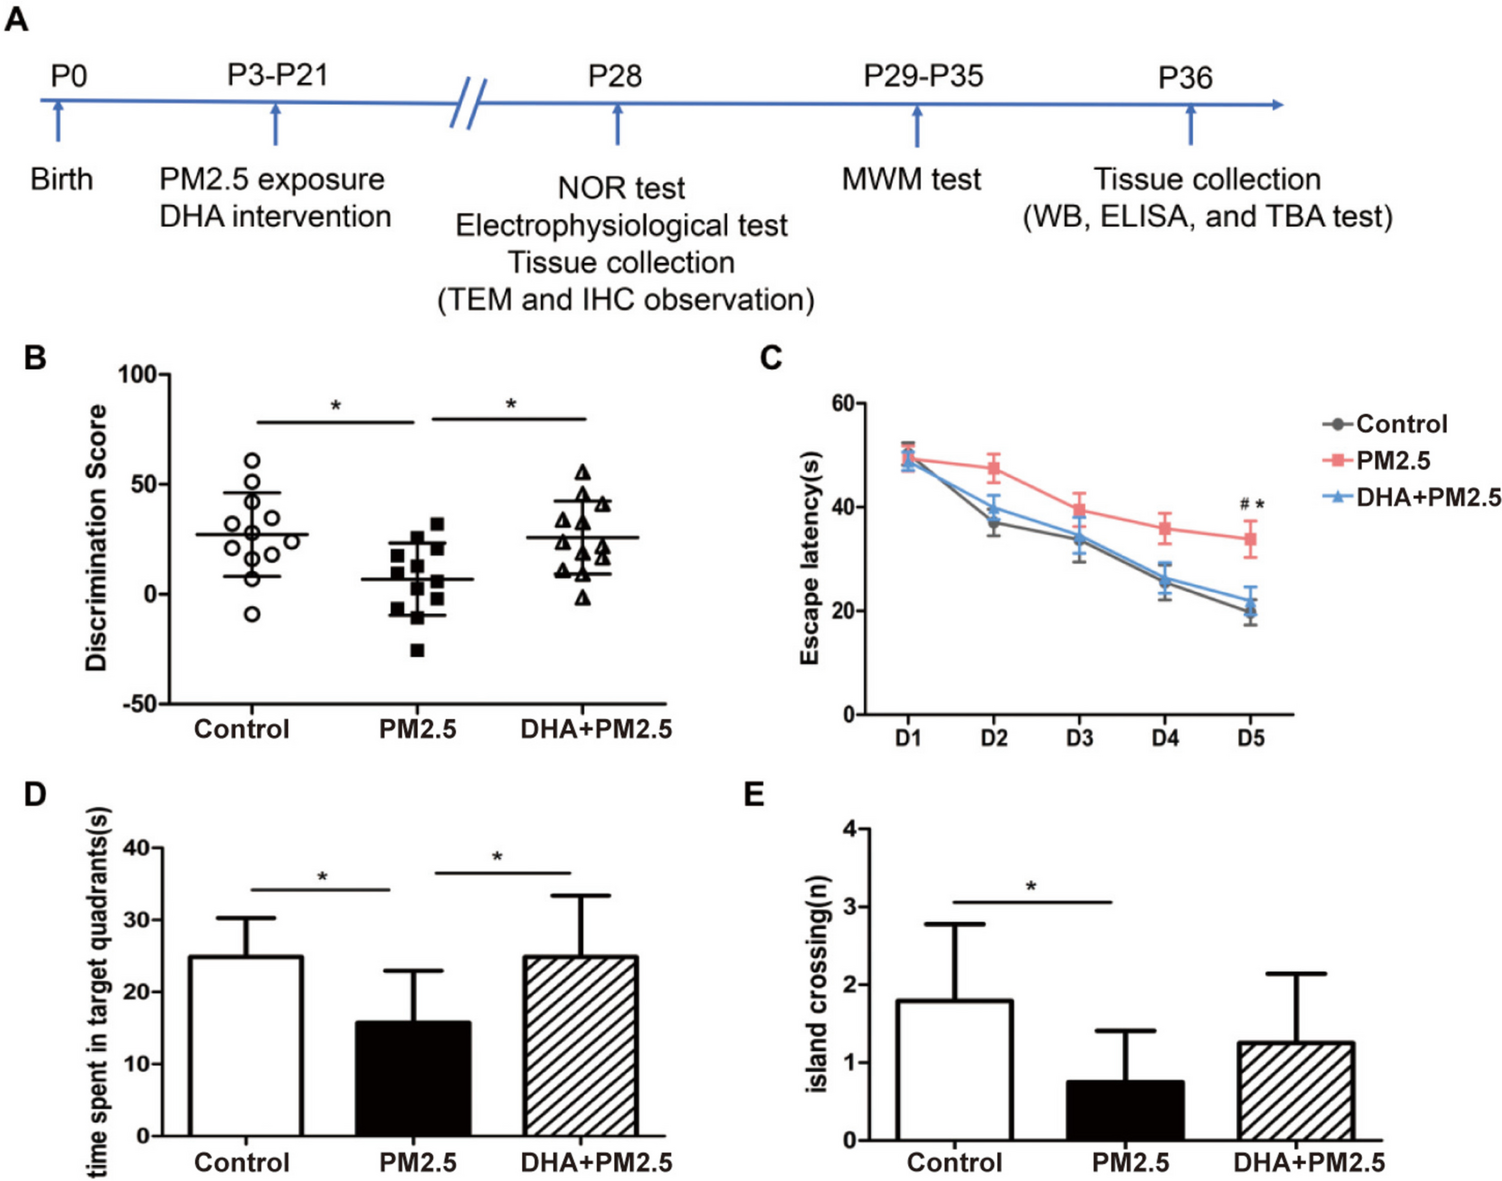 Protective effects of docosahexaenoic acid supplementation on cognitive dysfunction and hippocampal synaptic plasticity impairment induced by early postnatal PM2.5 exposure in young rats